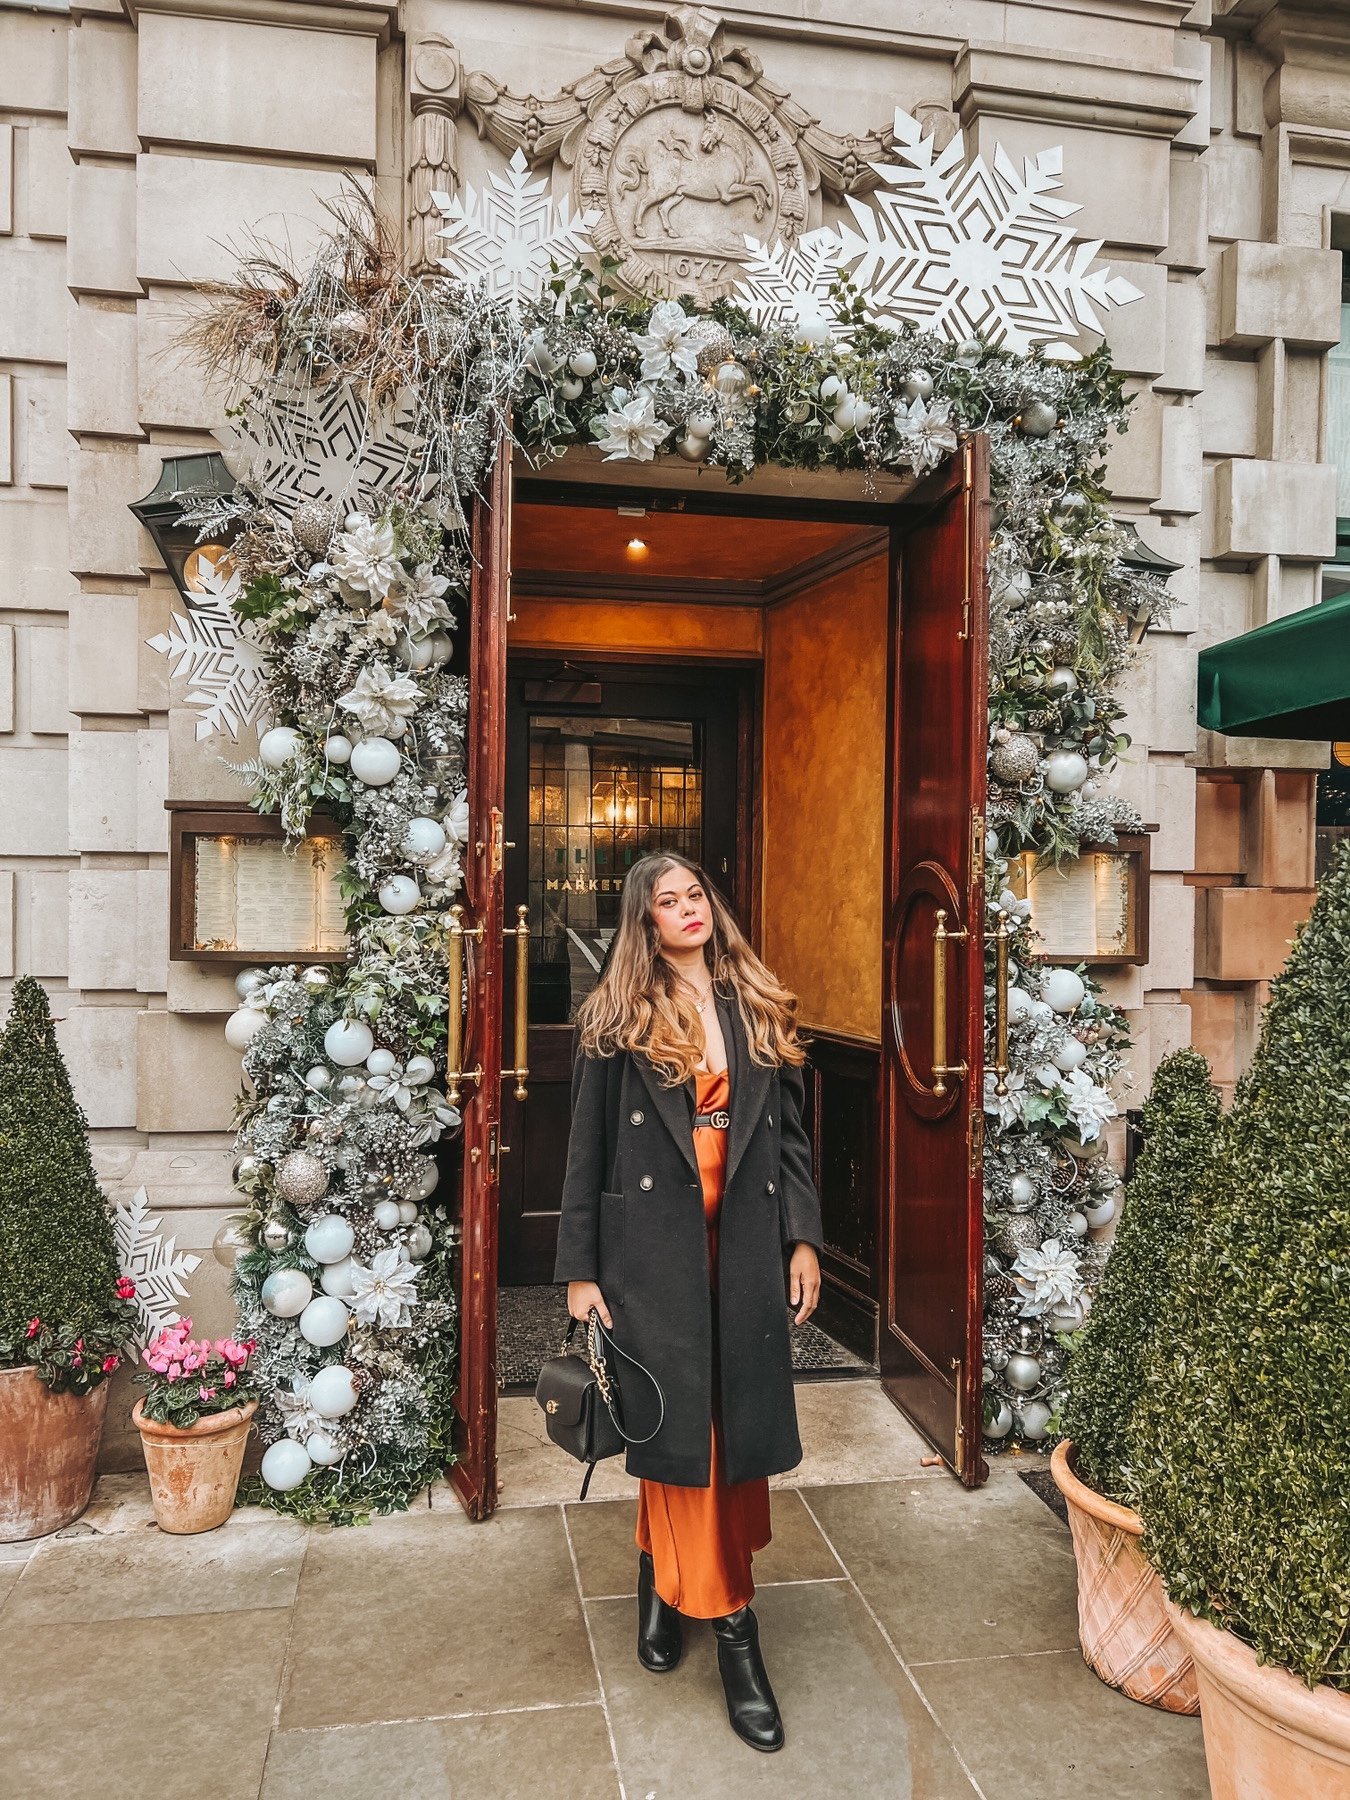 The Ivy market Grill , Covent garden Most Instagrammable spots in London 